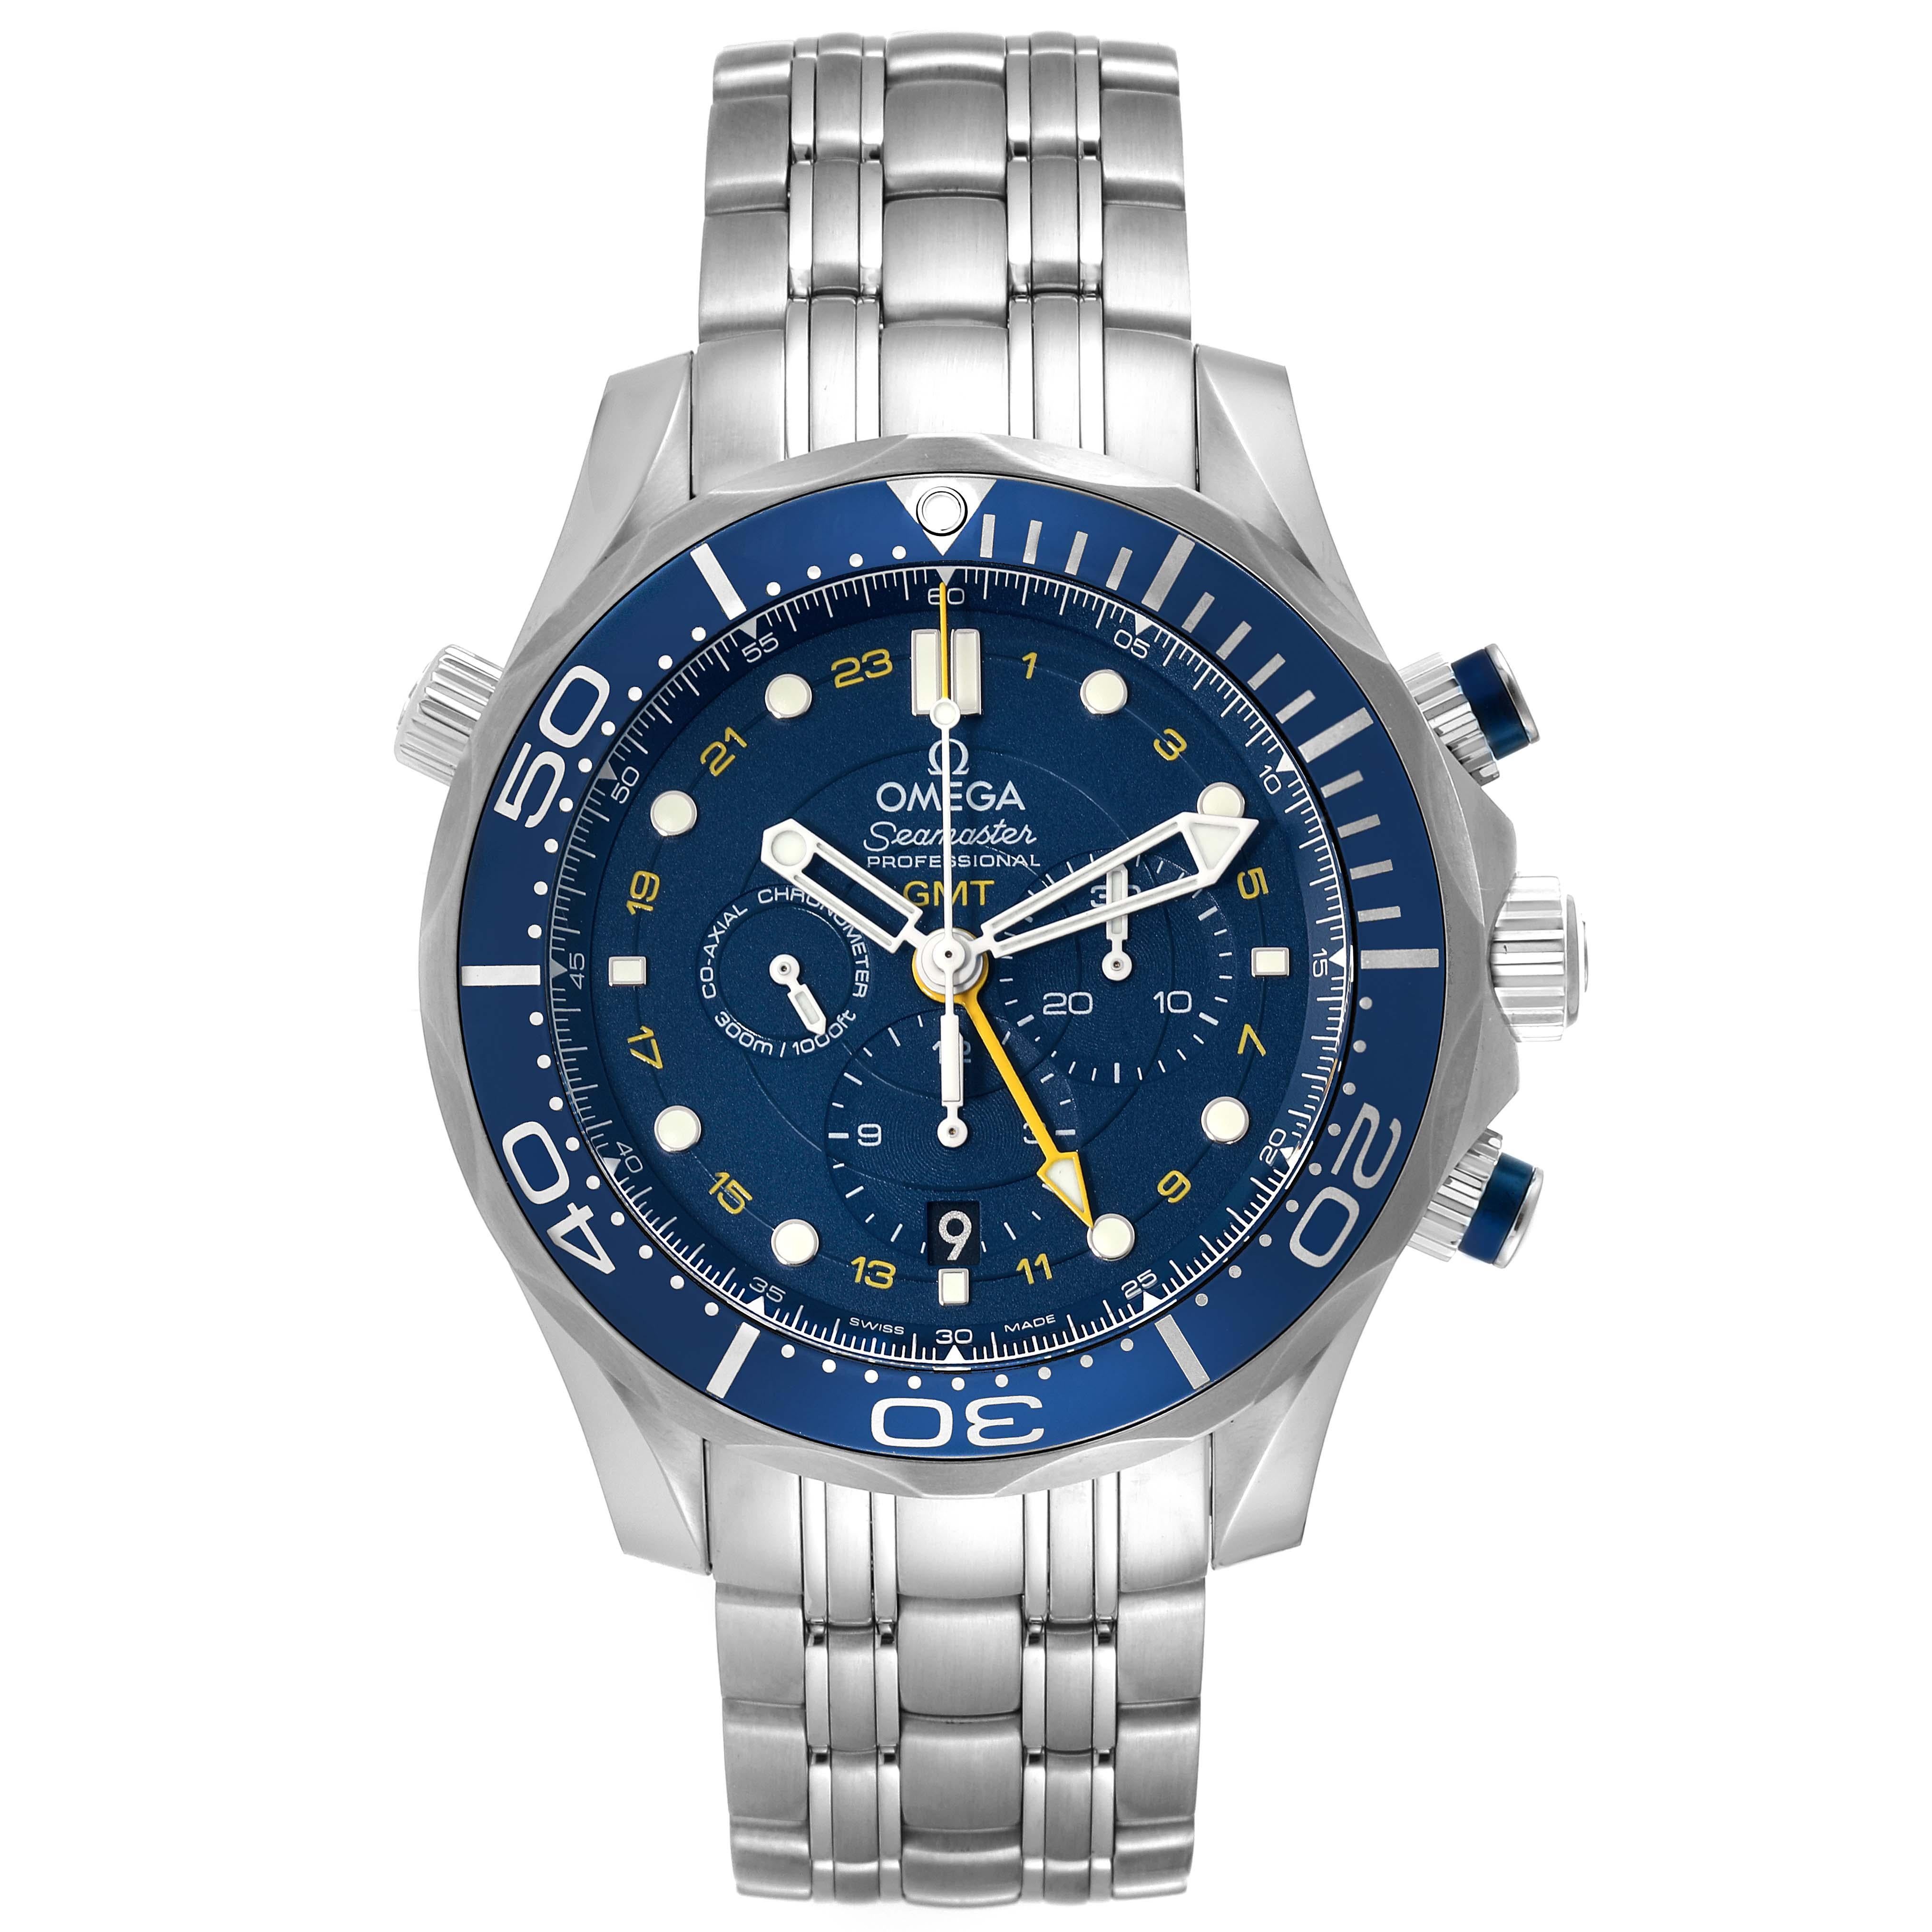 Omega Seamaster 300 GMT Steel Mens Watch 212.30.44.52.03.001 Box Card. Officially certified chronometer automatic self-winding chronograph movement. Brushed and polished stainless steel case 44 mm in diameter. Omega logo on a crown. Blue